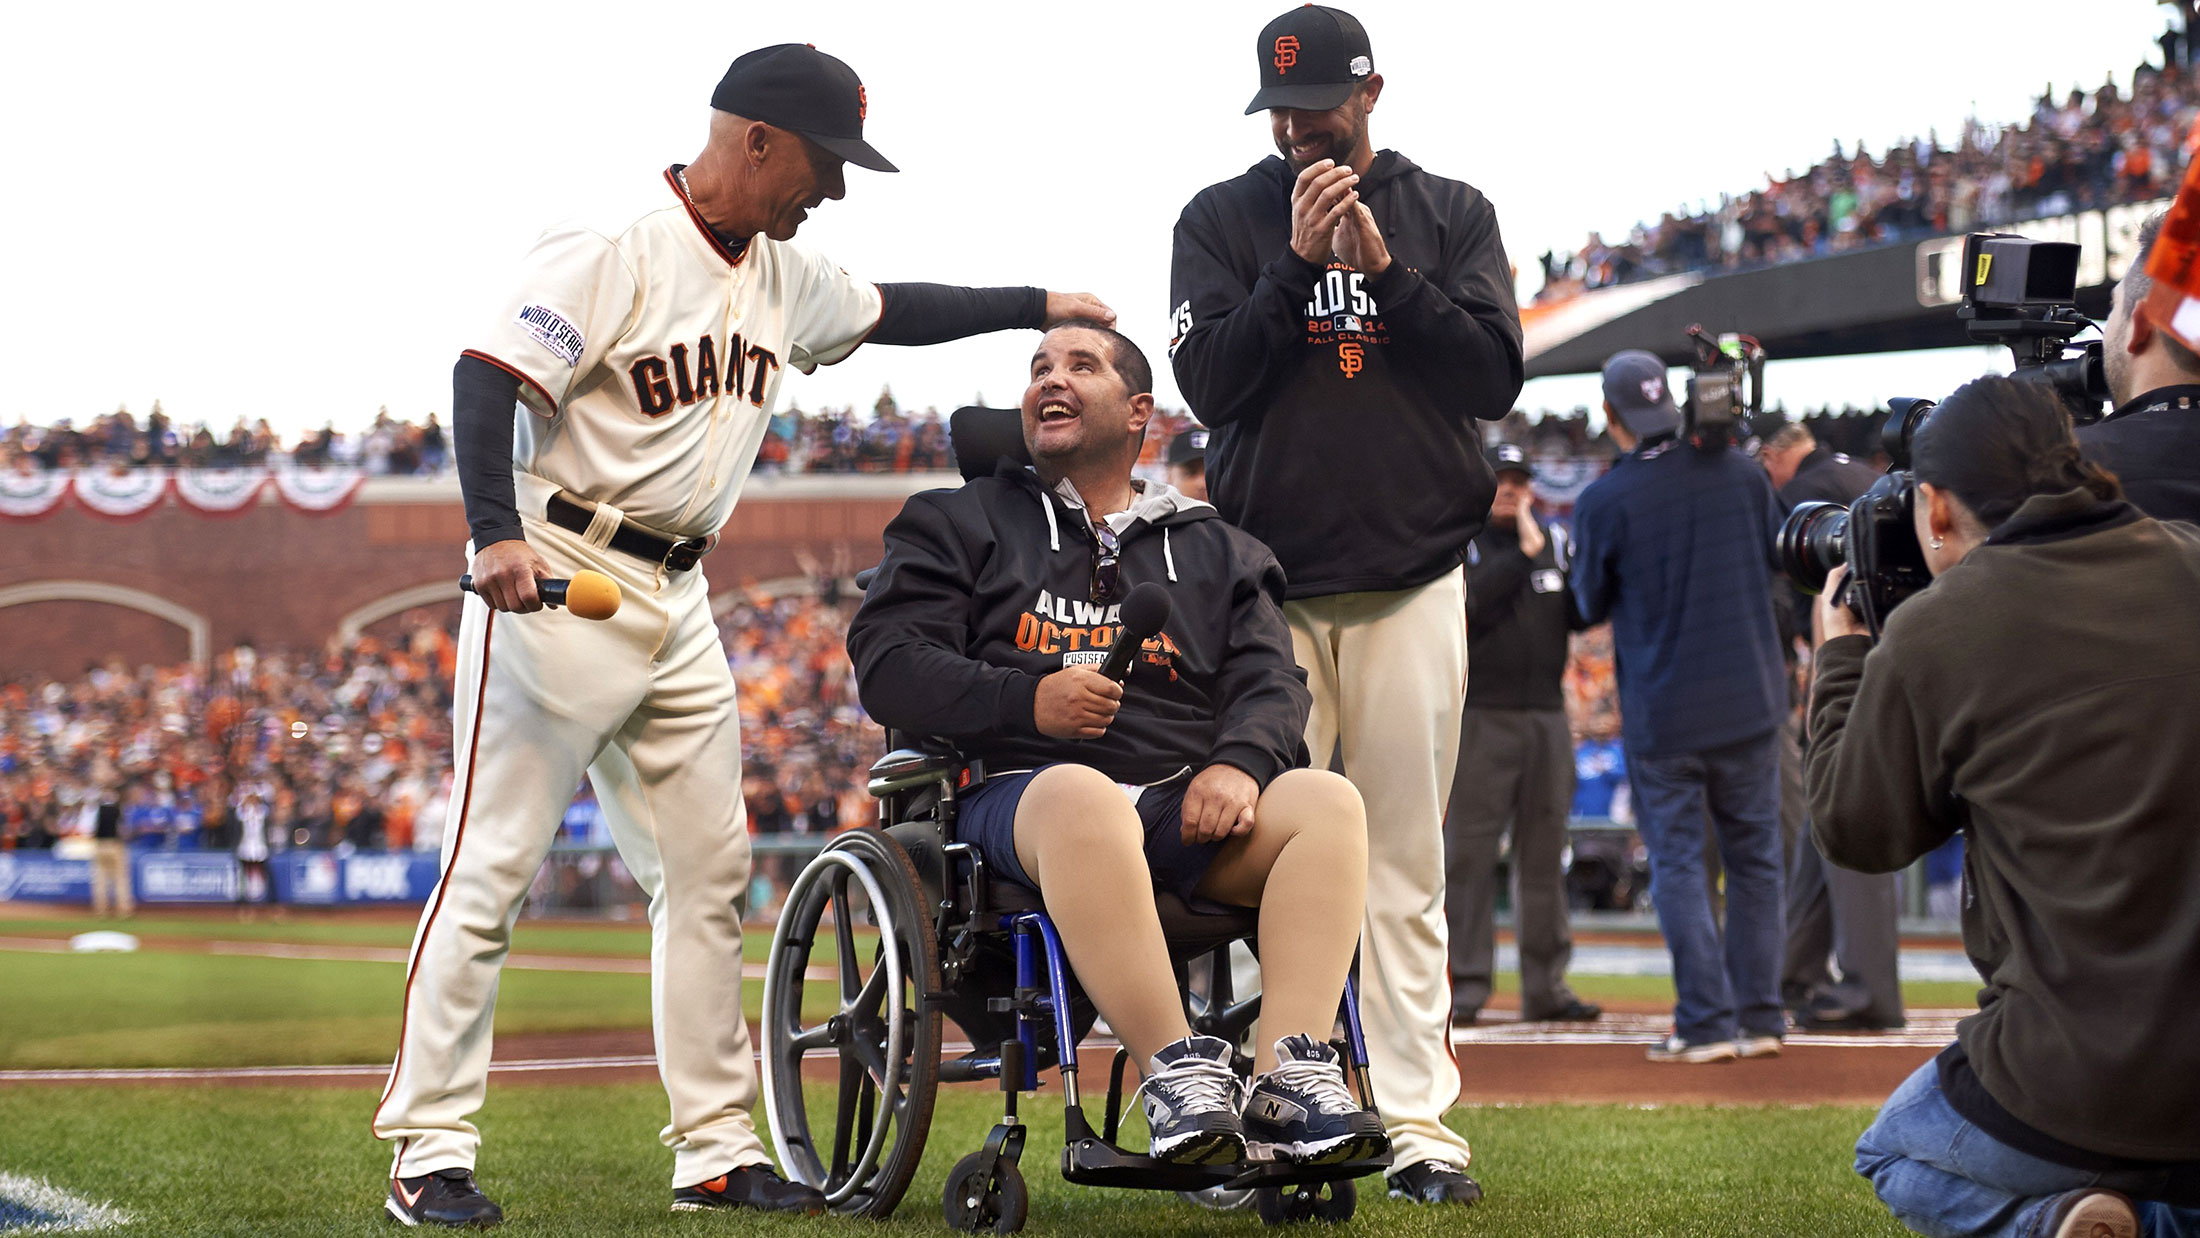 San Francisco Giants fan Bryan Stow, center, before announcing “Play Ball!” with third base coach Tim Flannery and Jeremy Affeldt before a game against the Kansas City Royals at AT&amp;T Park on Oct. 25, 2014.
